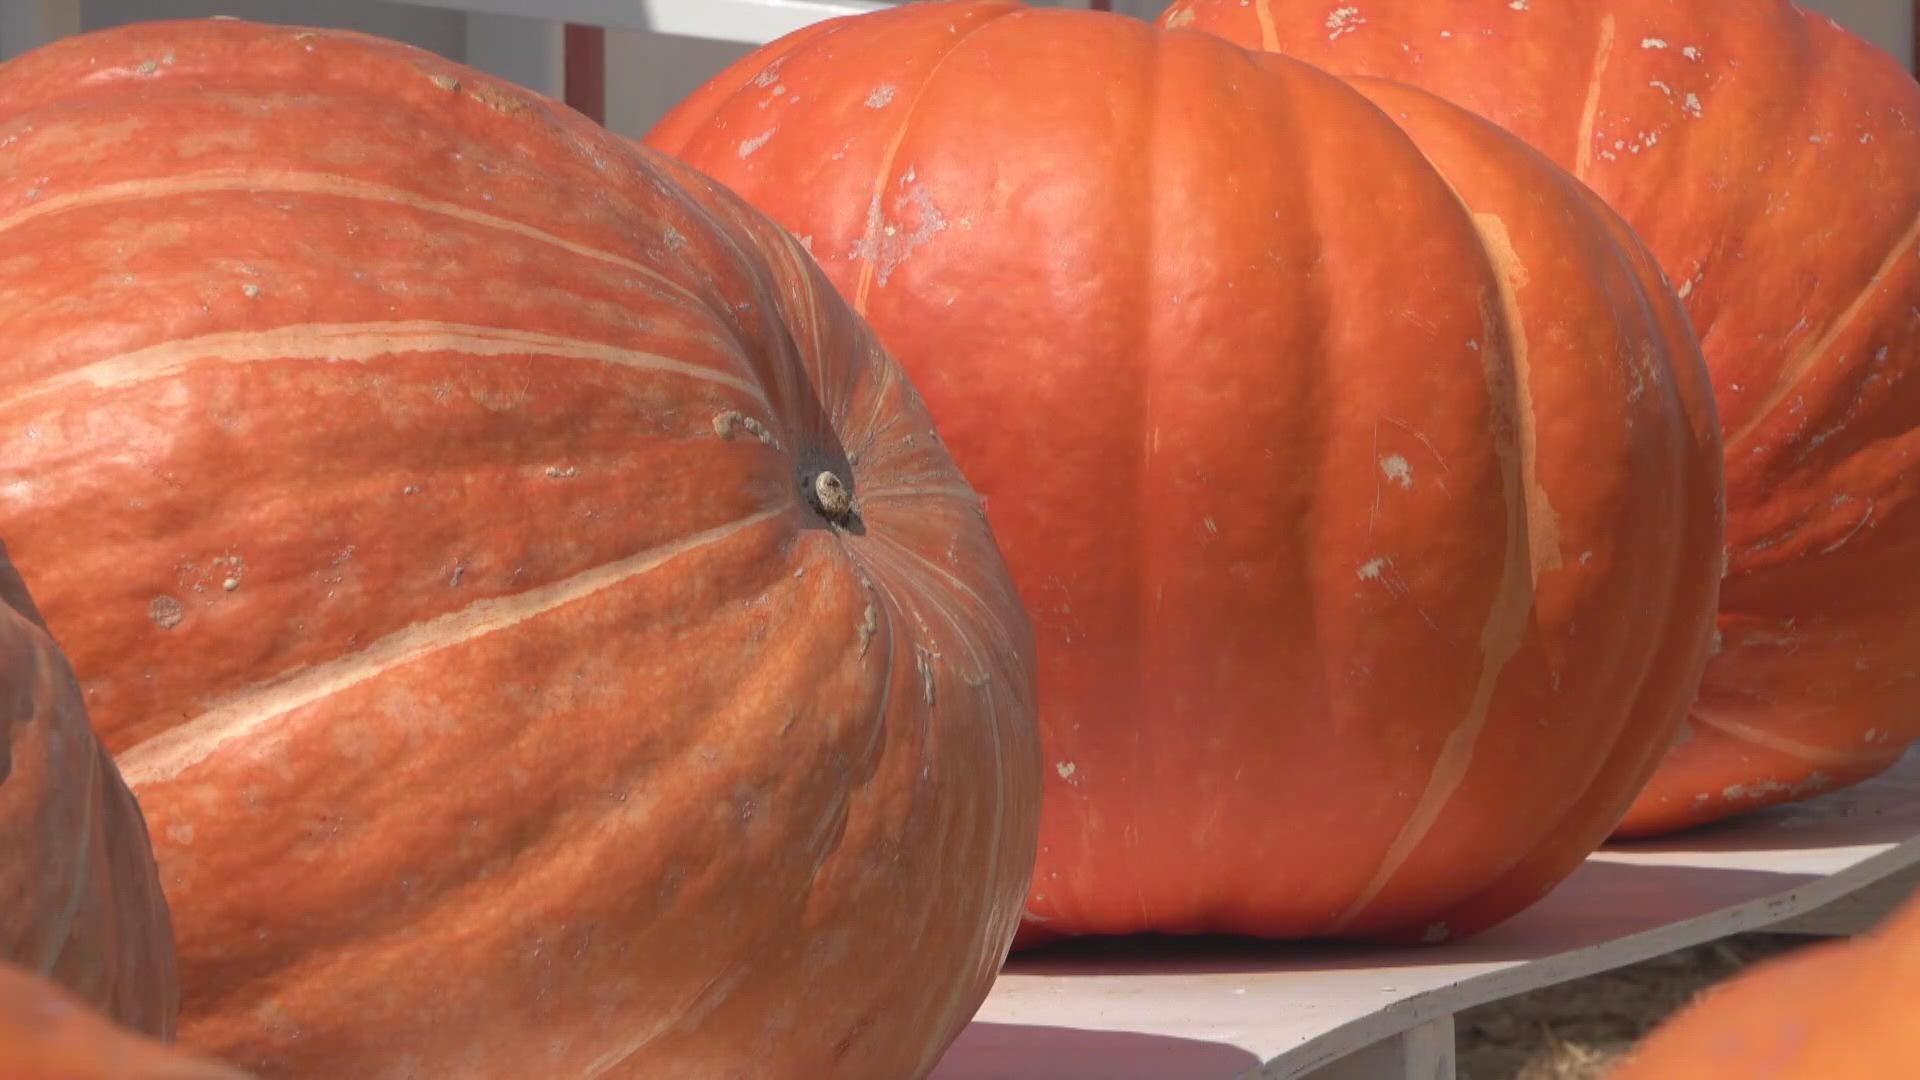 It's October and that means that it's time to get out to a San Diego County pumpkin patch!